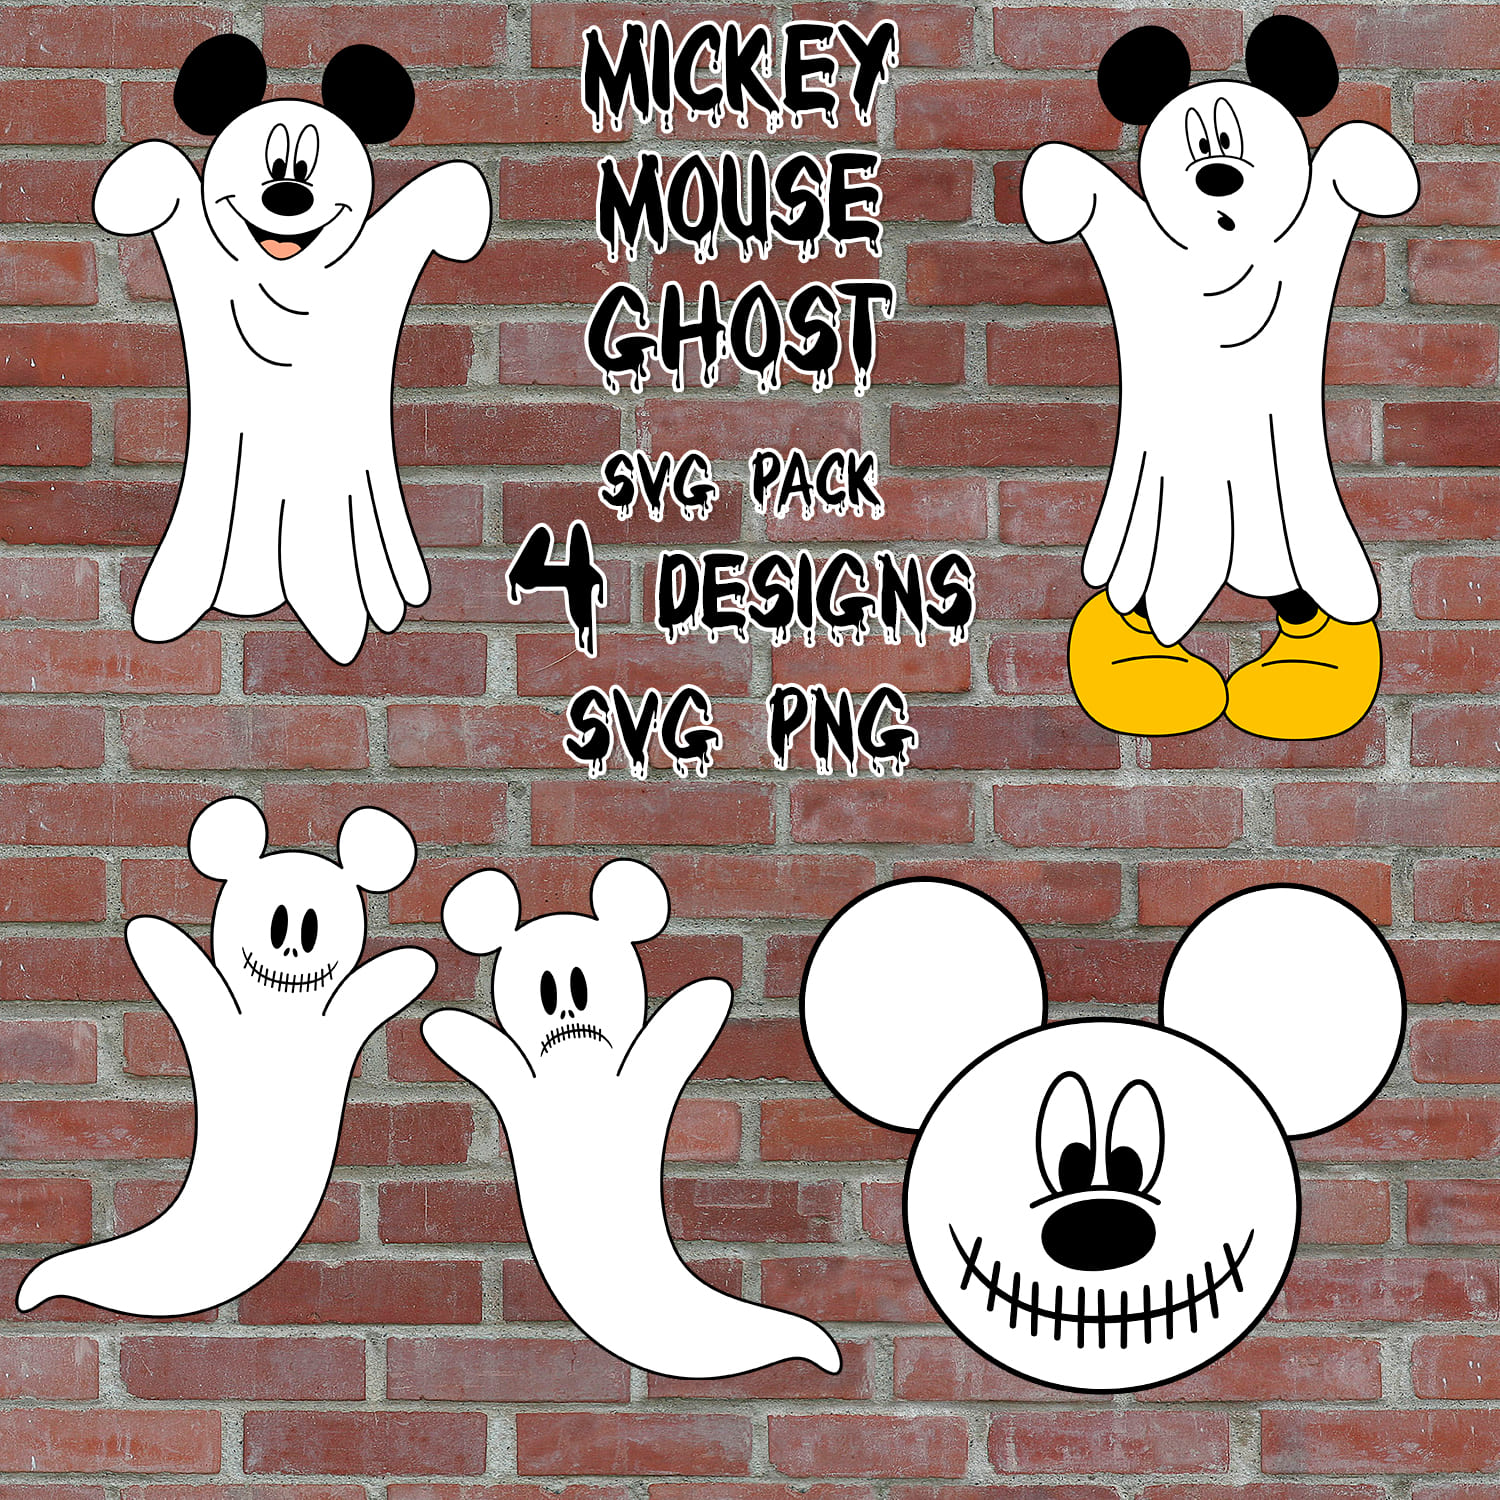 Mickey Mouse Ghost SVG - main image preview.